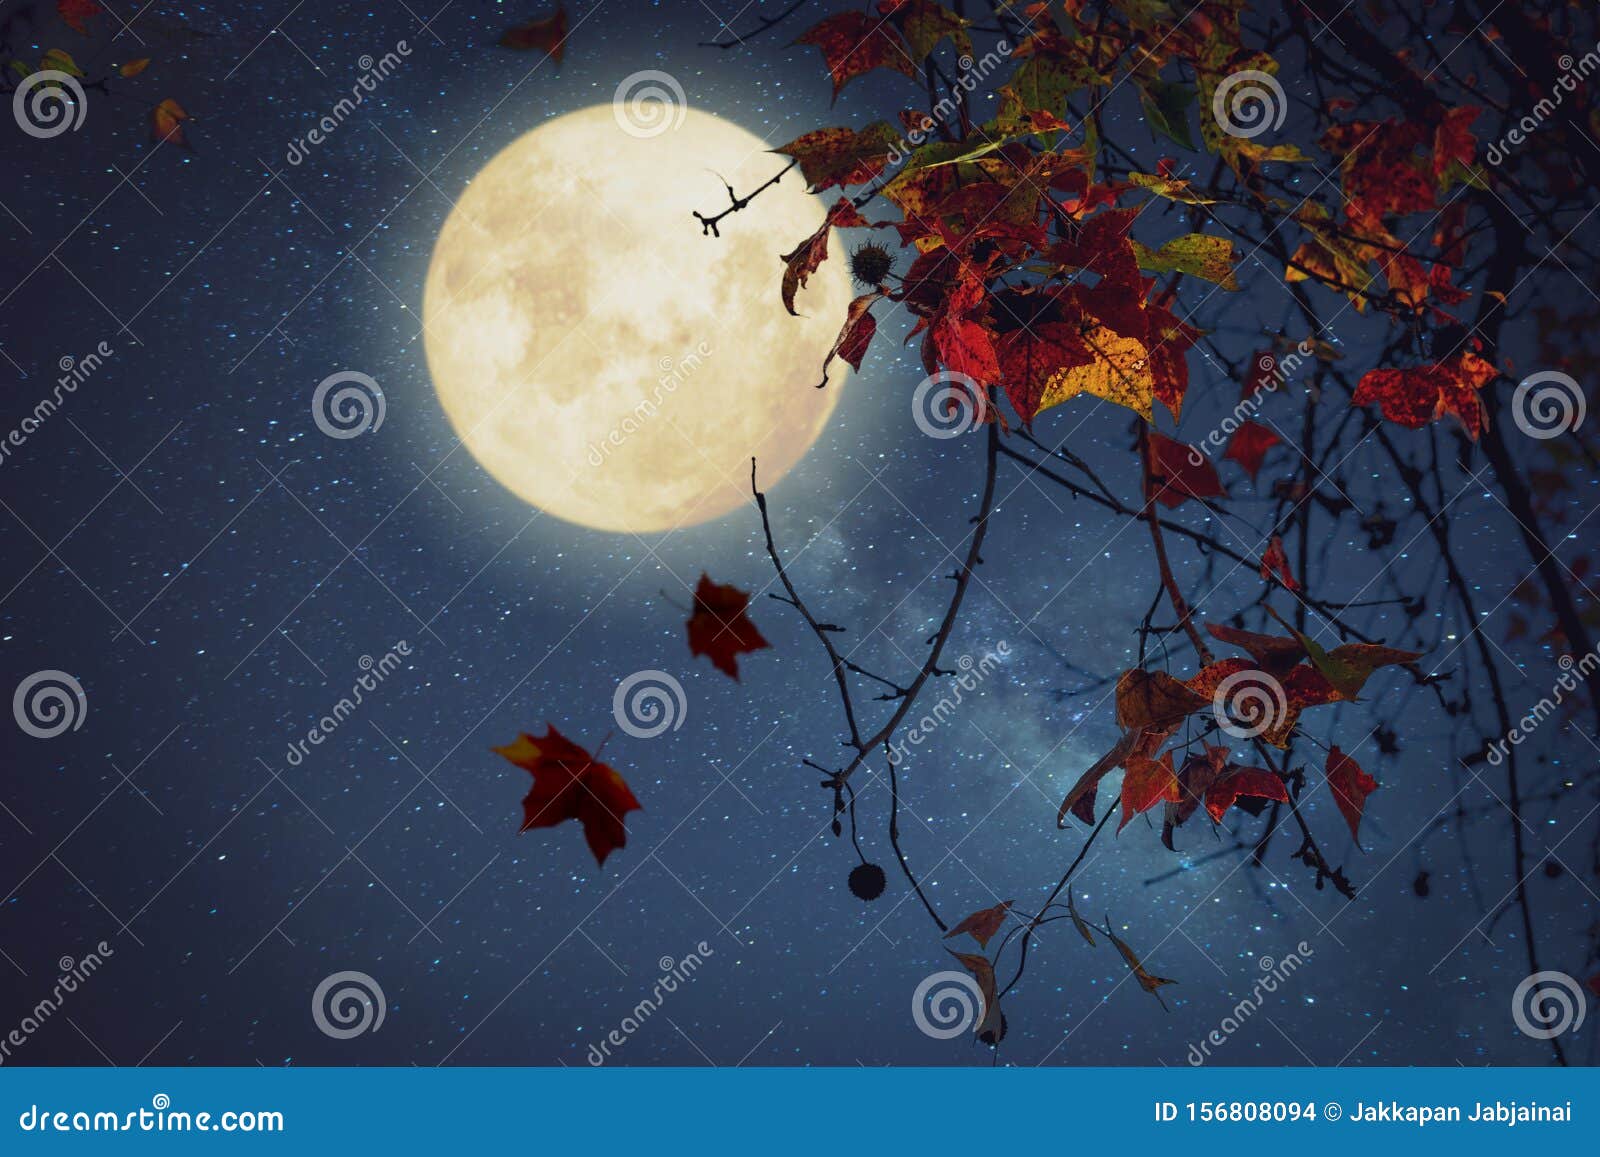 maple tree in fall season and full moon with star.